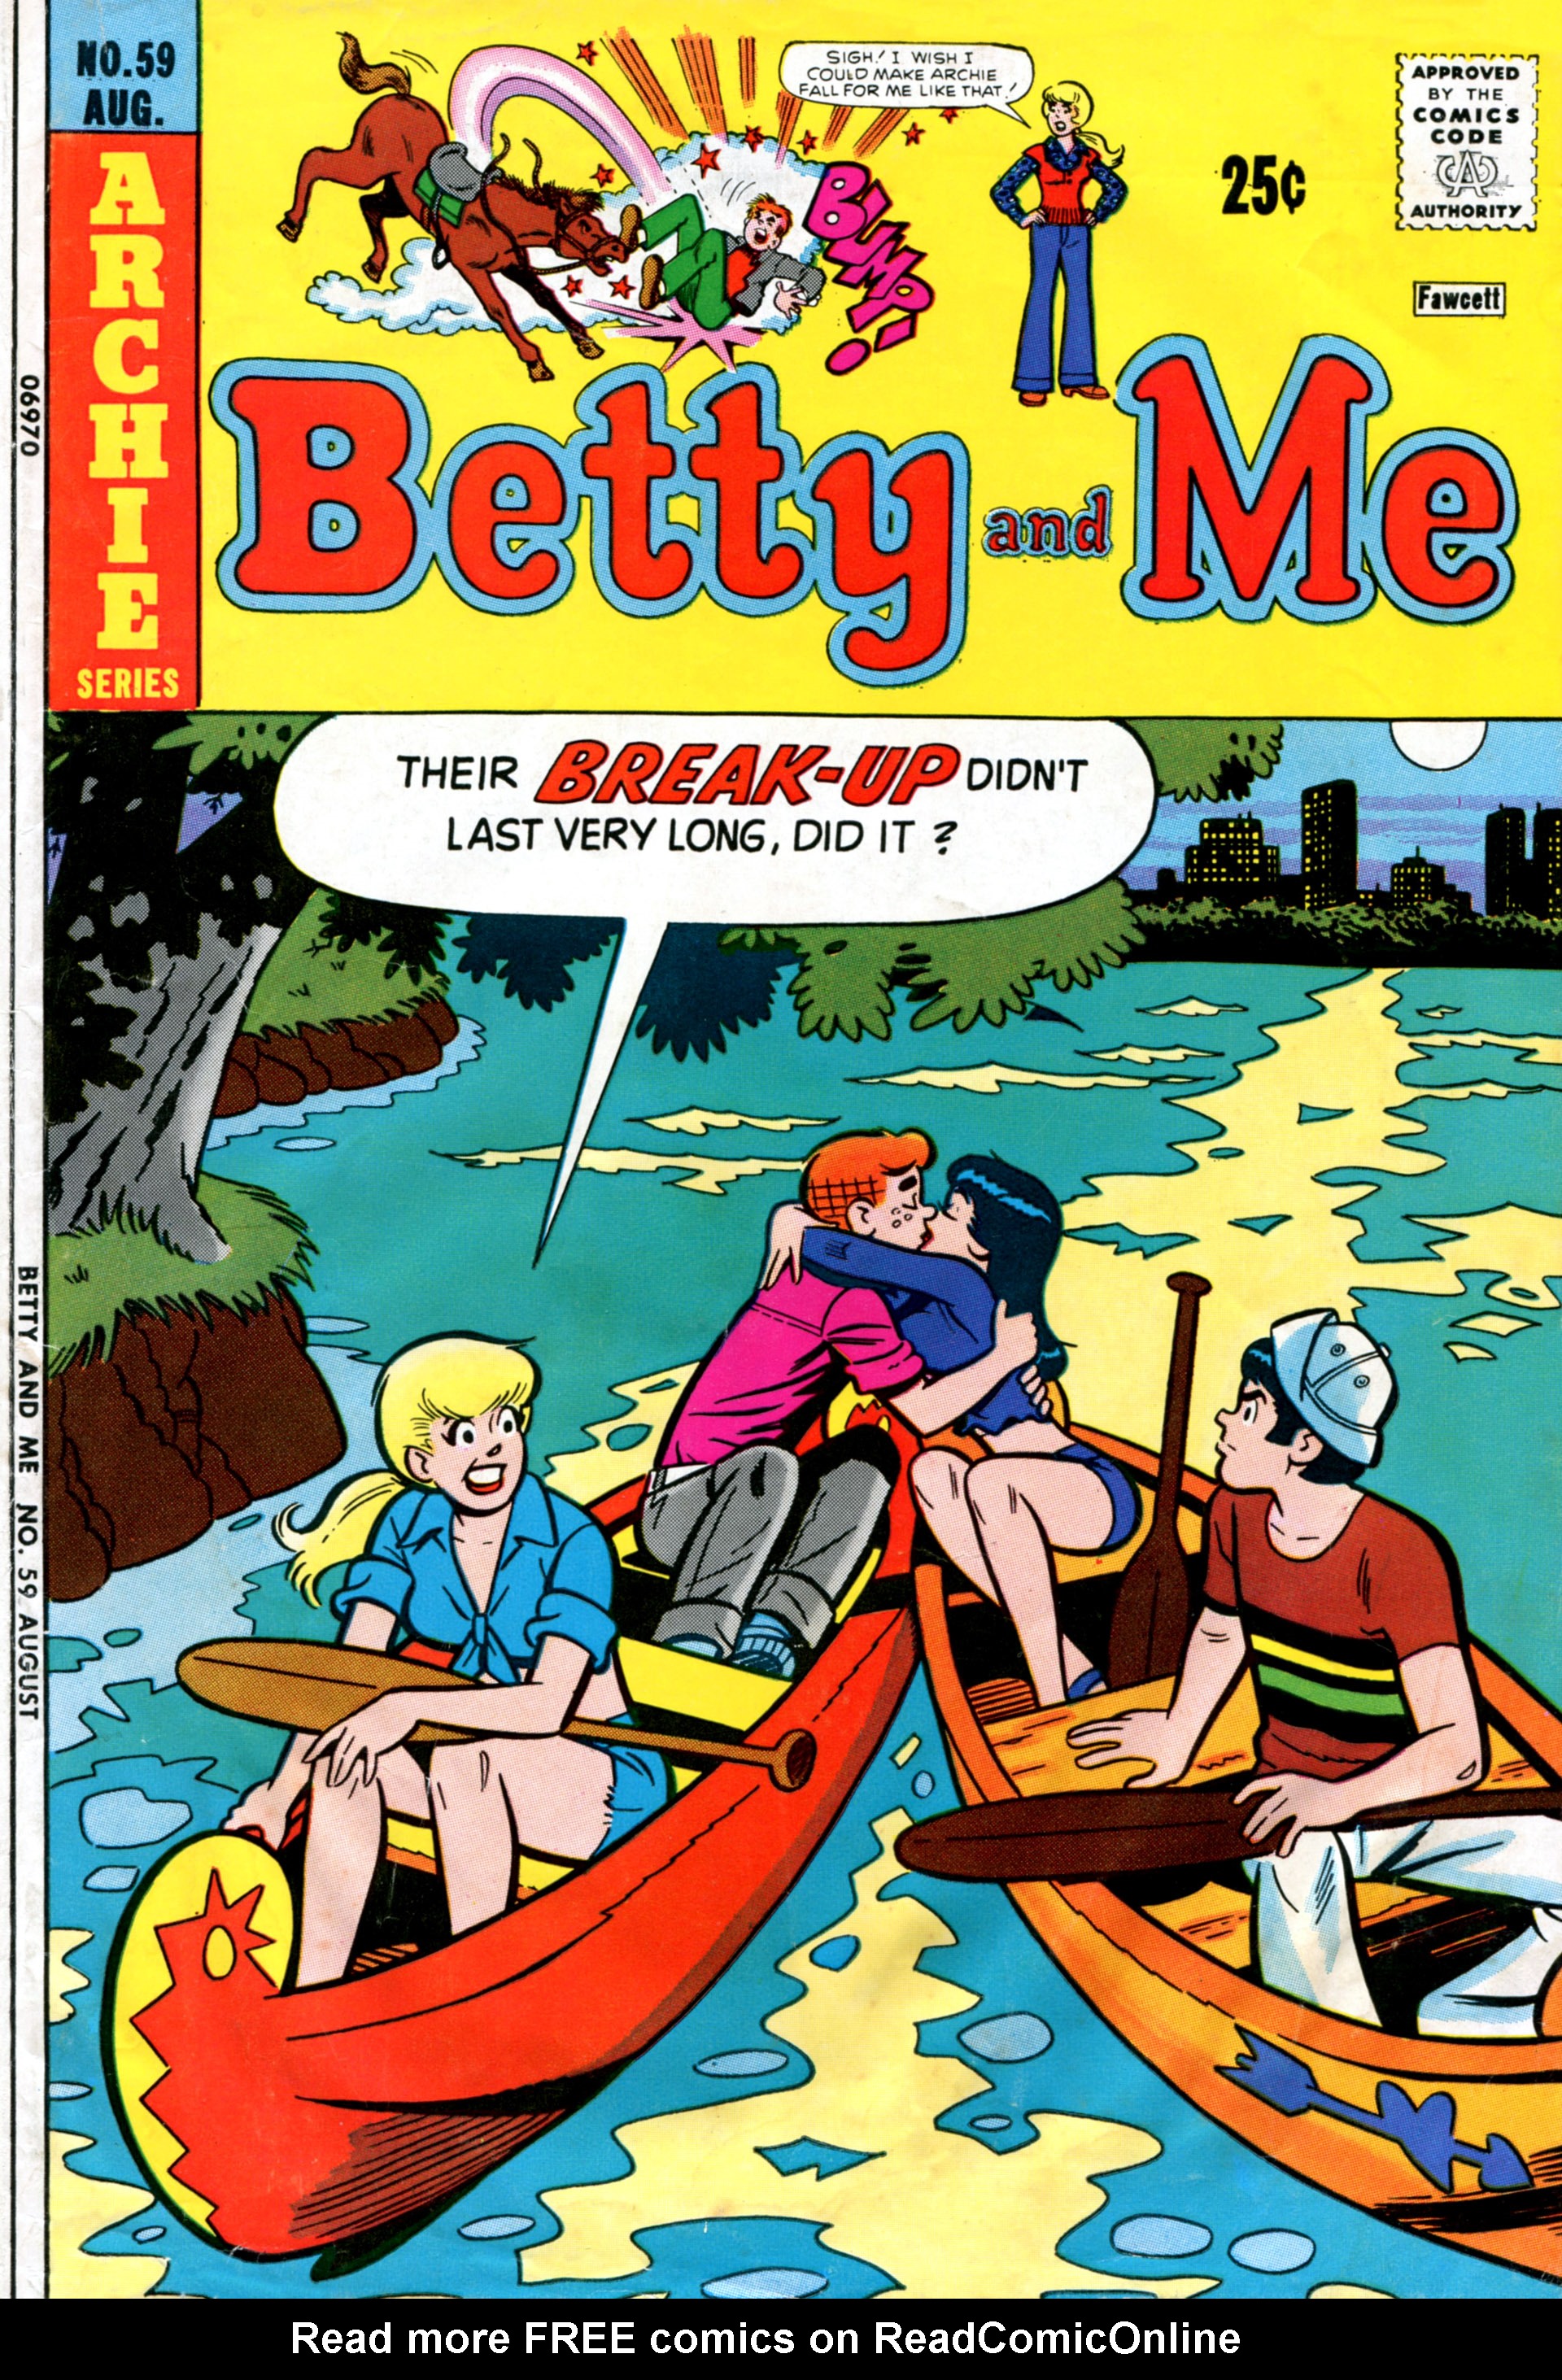 Read online Betty and Me comic -  Issue #59 - 1